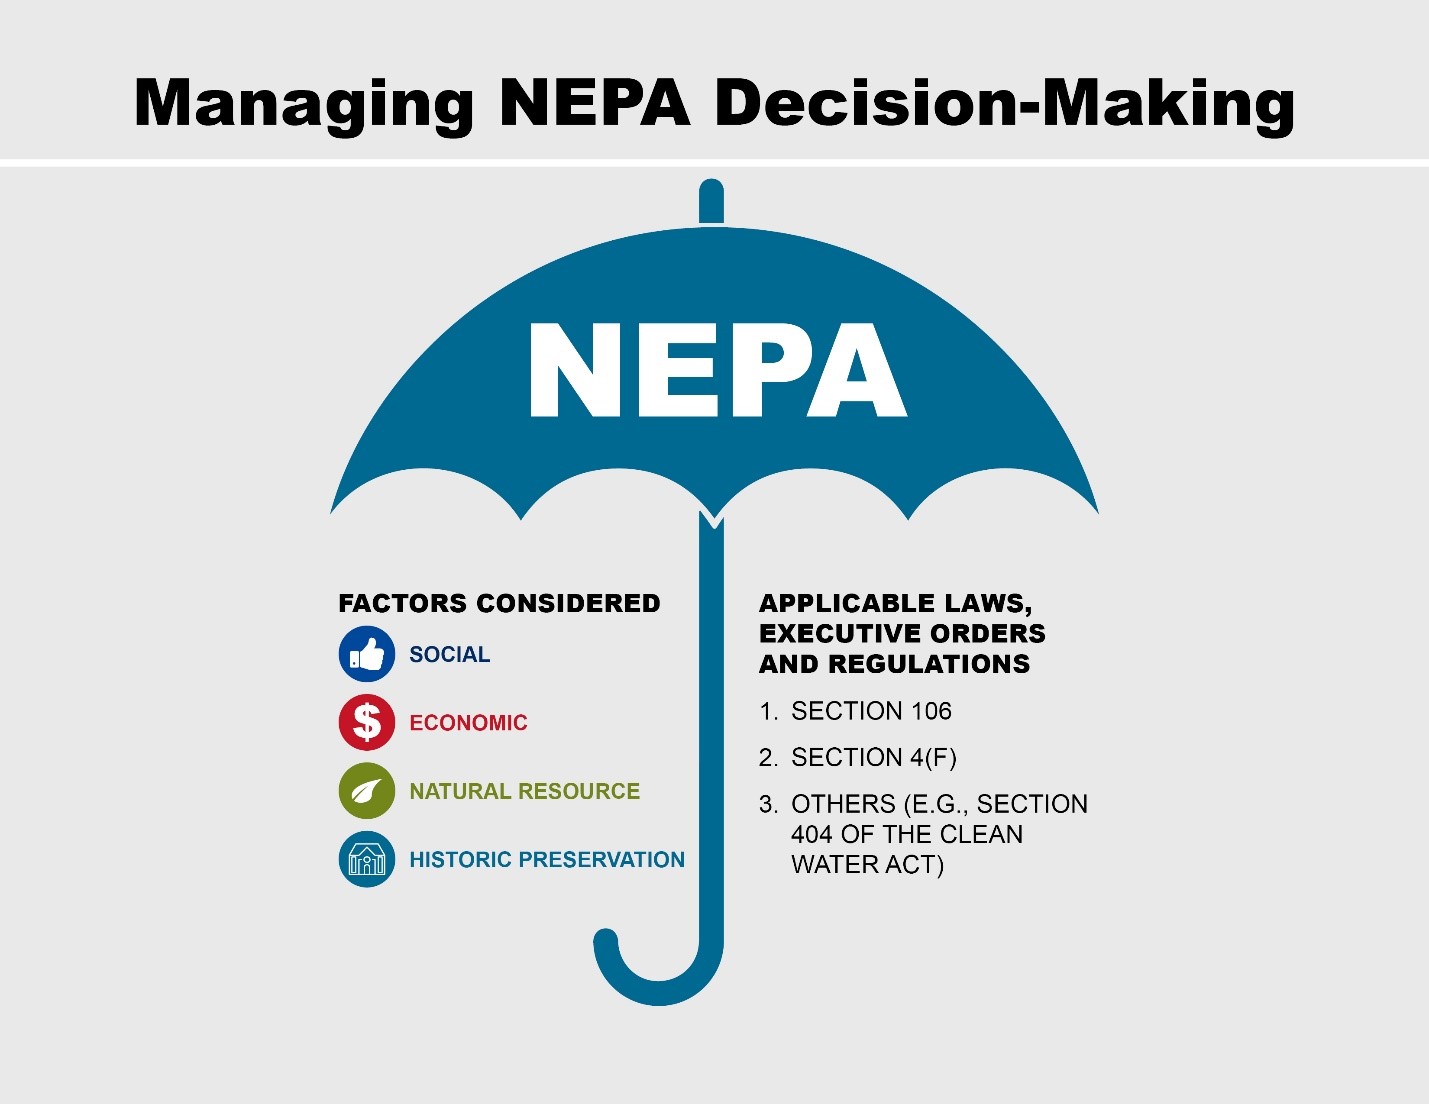 A graphic titled Managing NEPA Decision-Making. There is an umbrella labled NEPA. There are two categories that fall under the umbrella, one being “Factors Considered” with social, economic, natural resources, and historic preservation falling under it. The other being “applicable laws, executive orders and regulations” with section 106, section 4(f), and others (e.g., section 404 of the clean water act) under the heading.